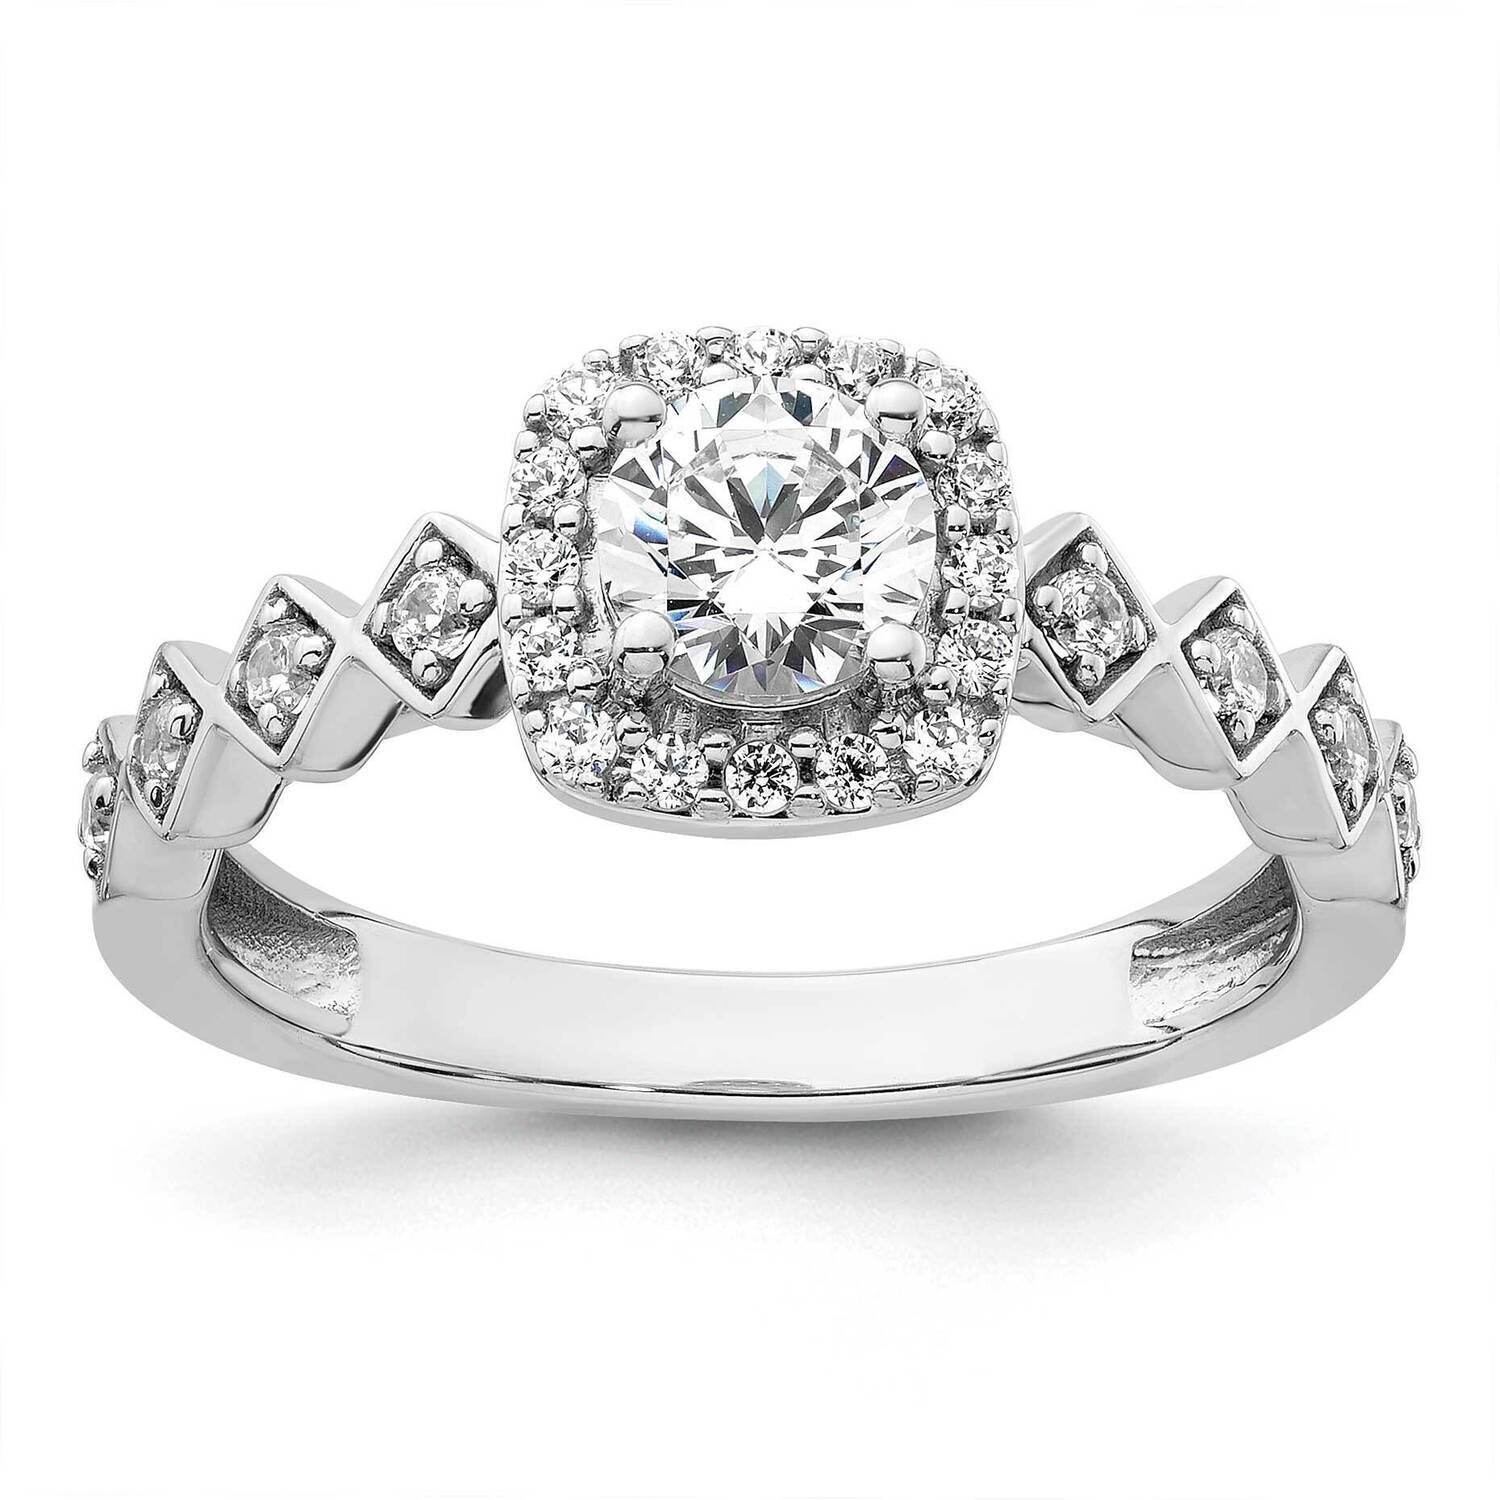 Diamond Halo Complete Engagement Ring 14k White Gold RM9435E-050-WAA